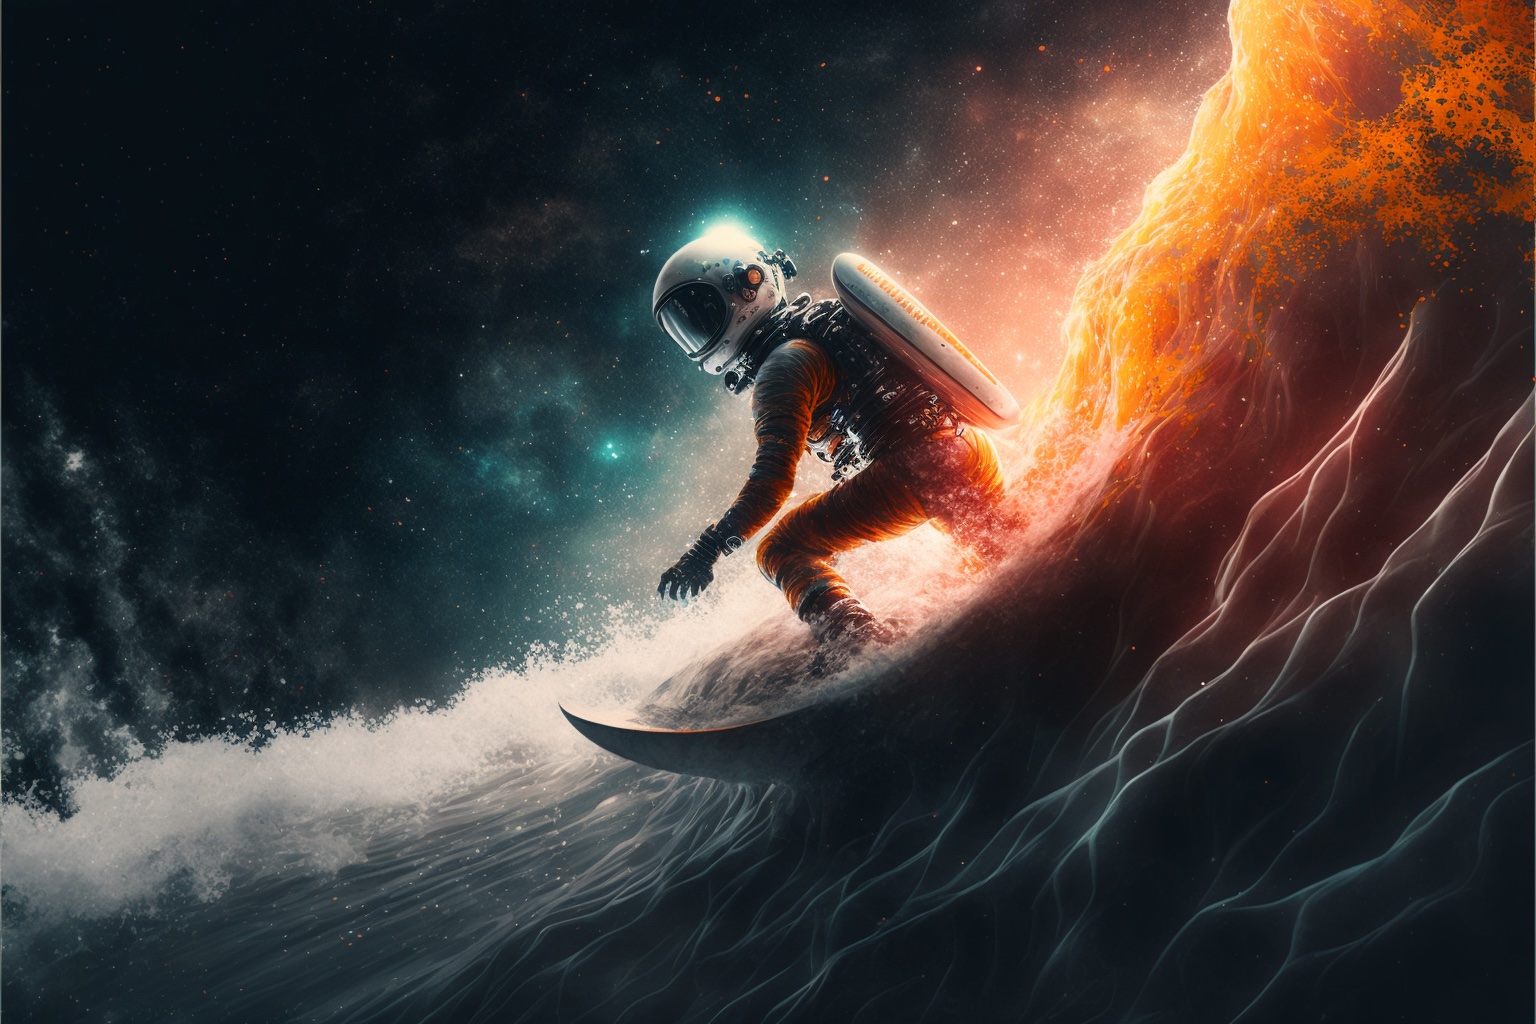 Surf in space